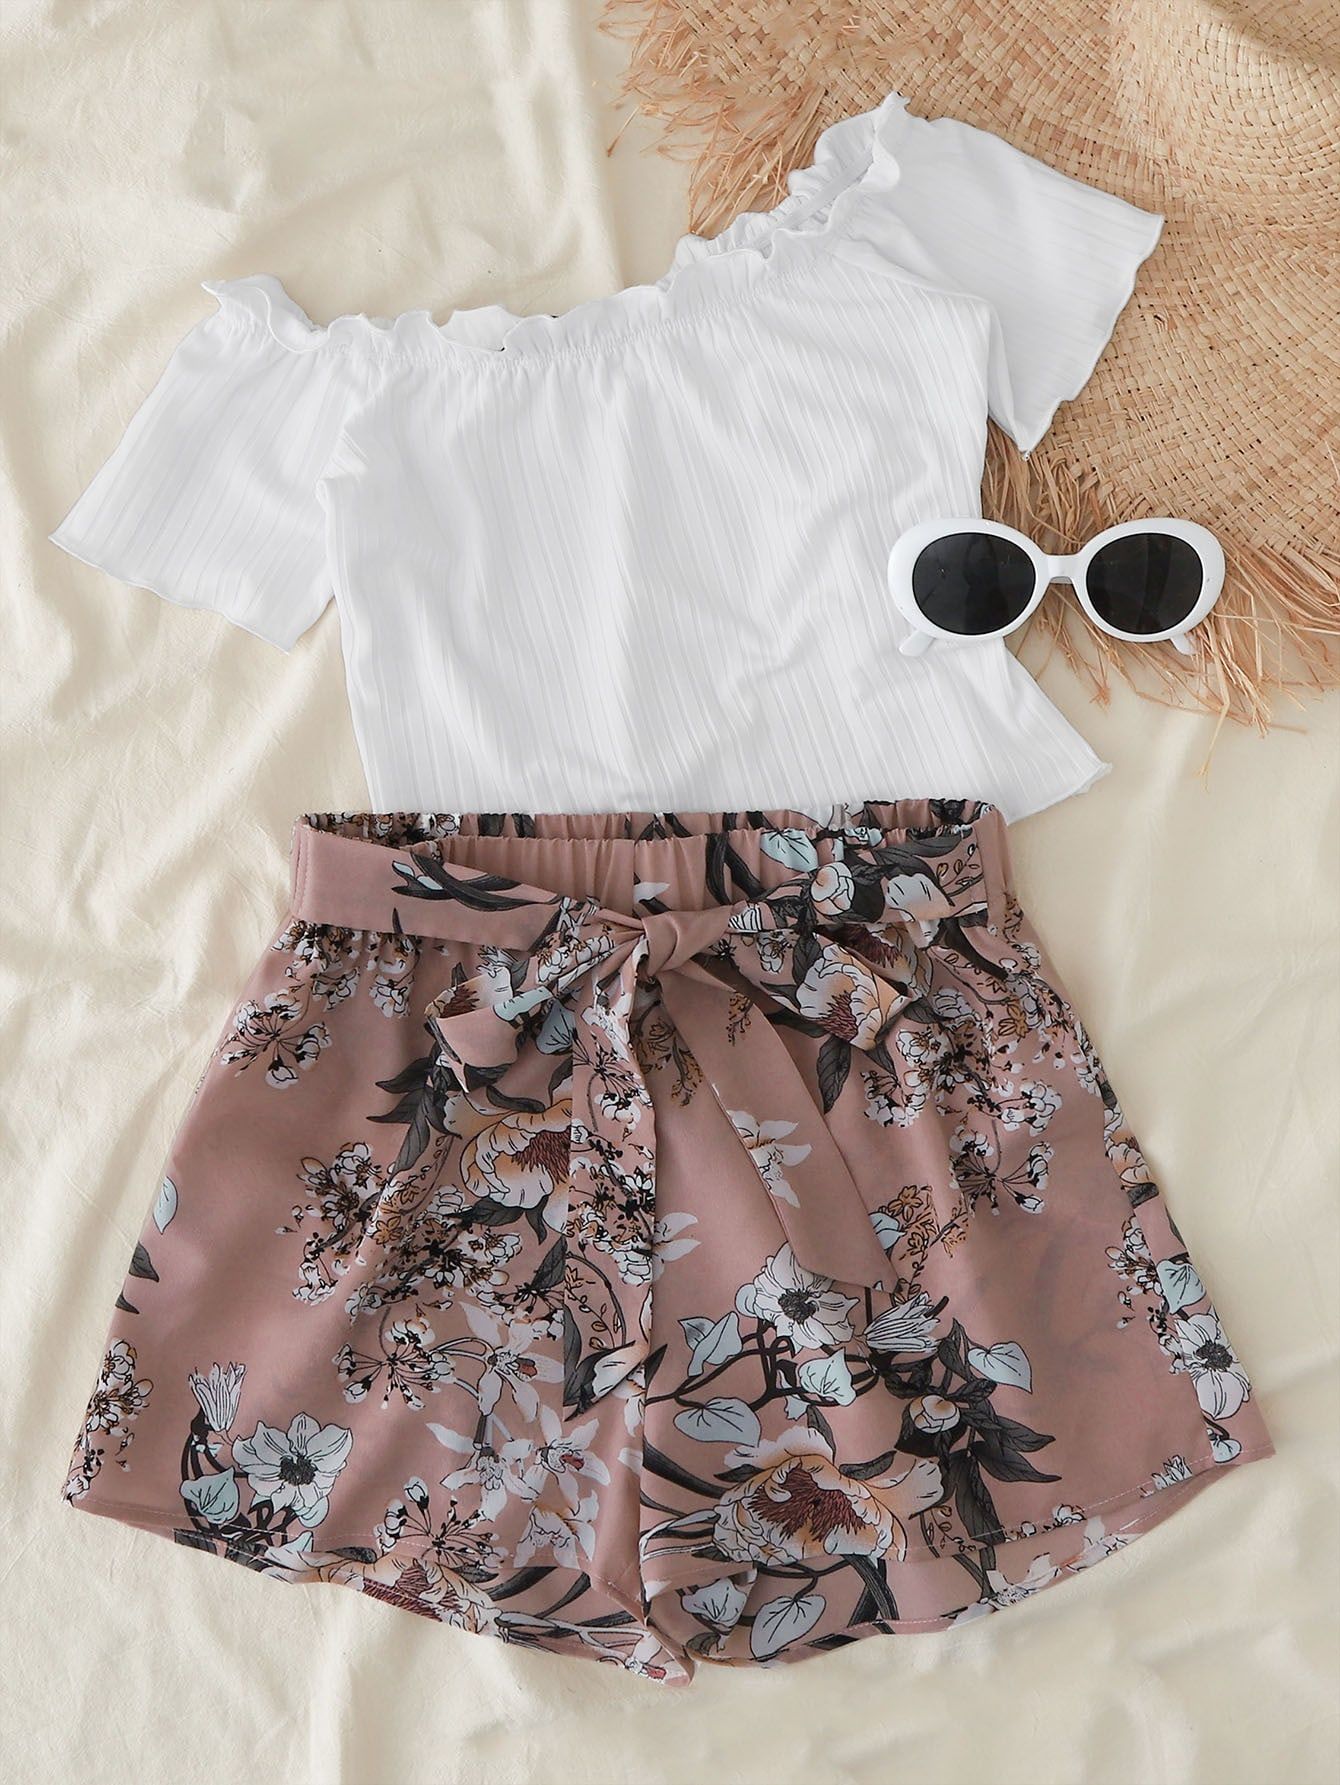 Add new and elegant accessories to your
collection with floral shorts